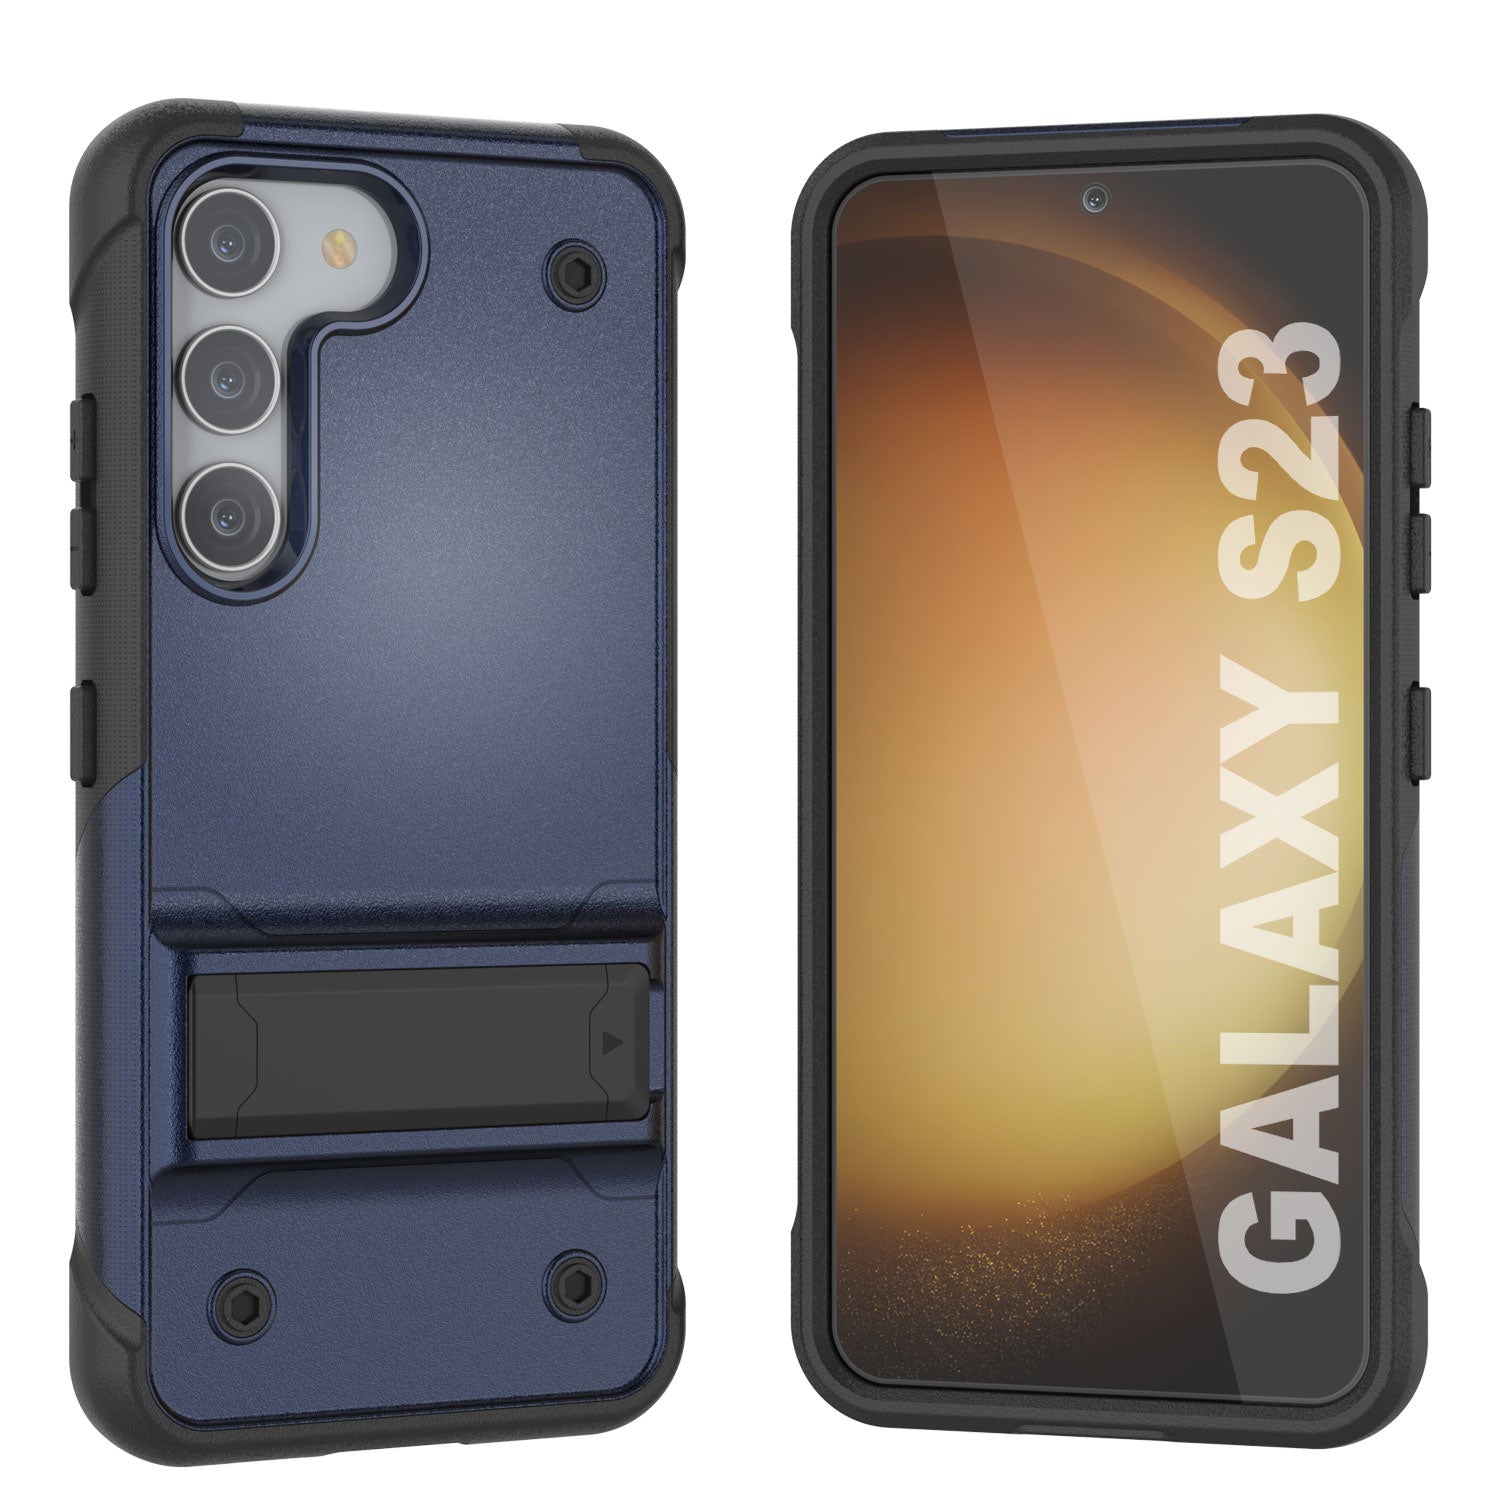 Punkcase Galaxy S24 Case [Reliance Series] Protective Hybrid Military Grade Cover W/Built-in Kickstand [Navy-Black]